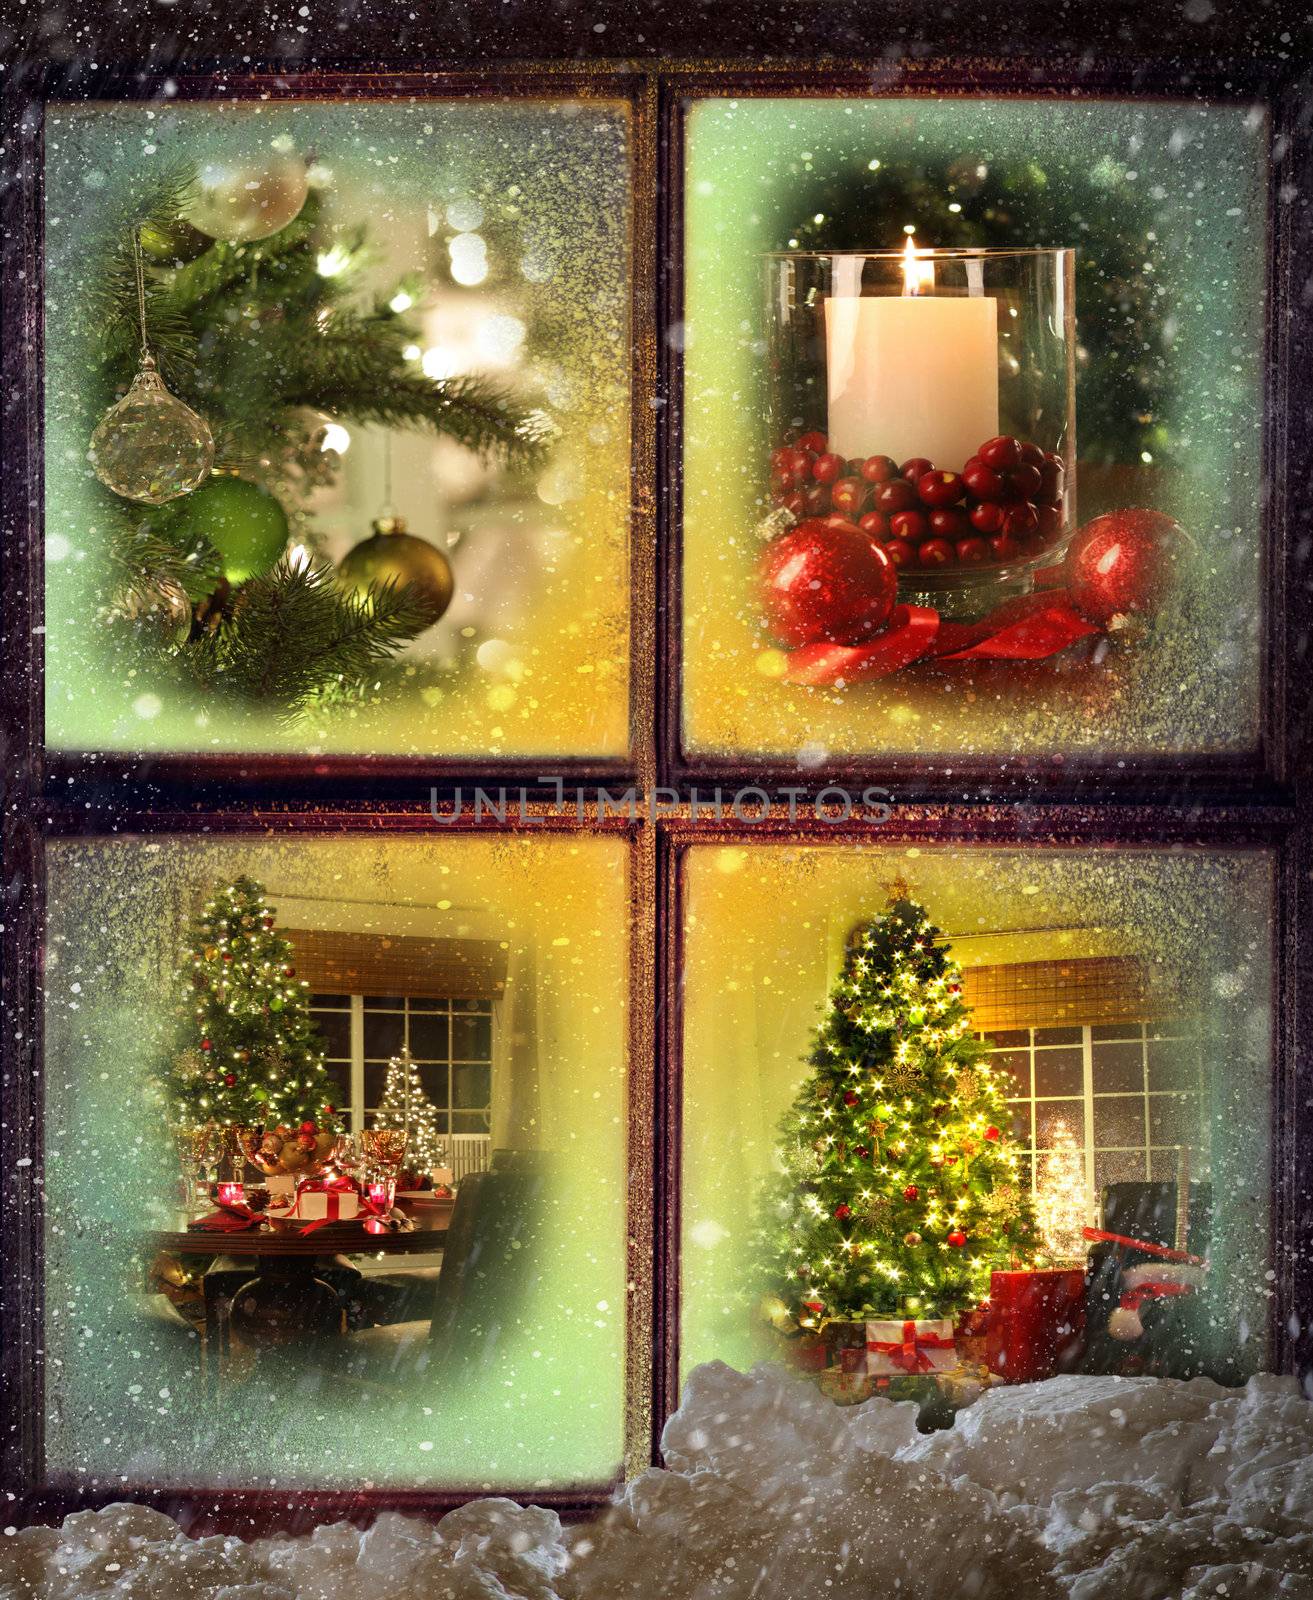 Vignettes of Christmas scenes seen through a wooden window  by Sandralise